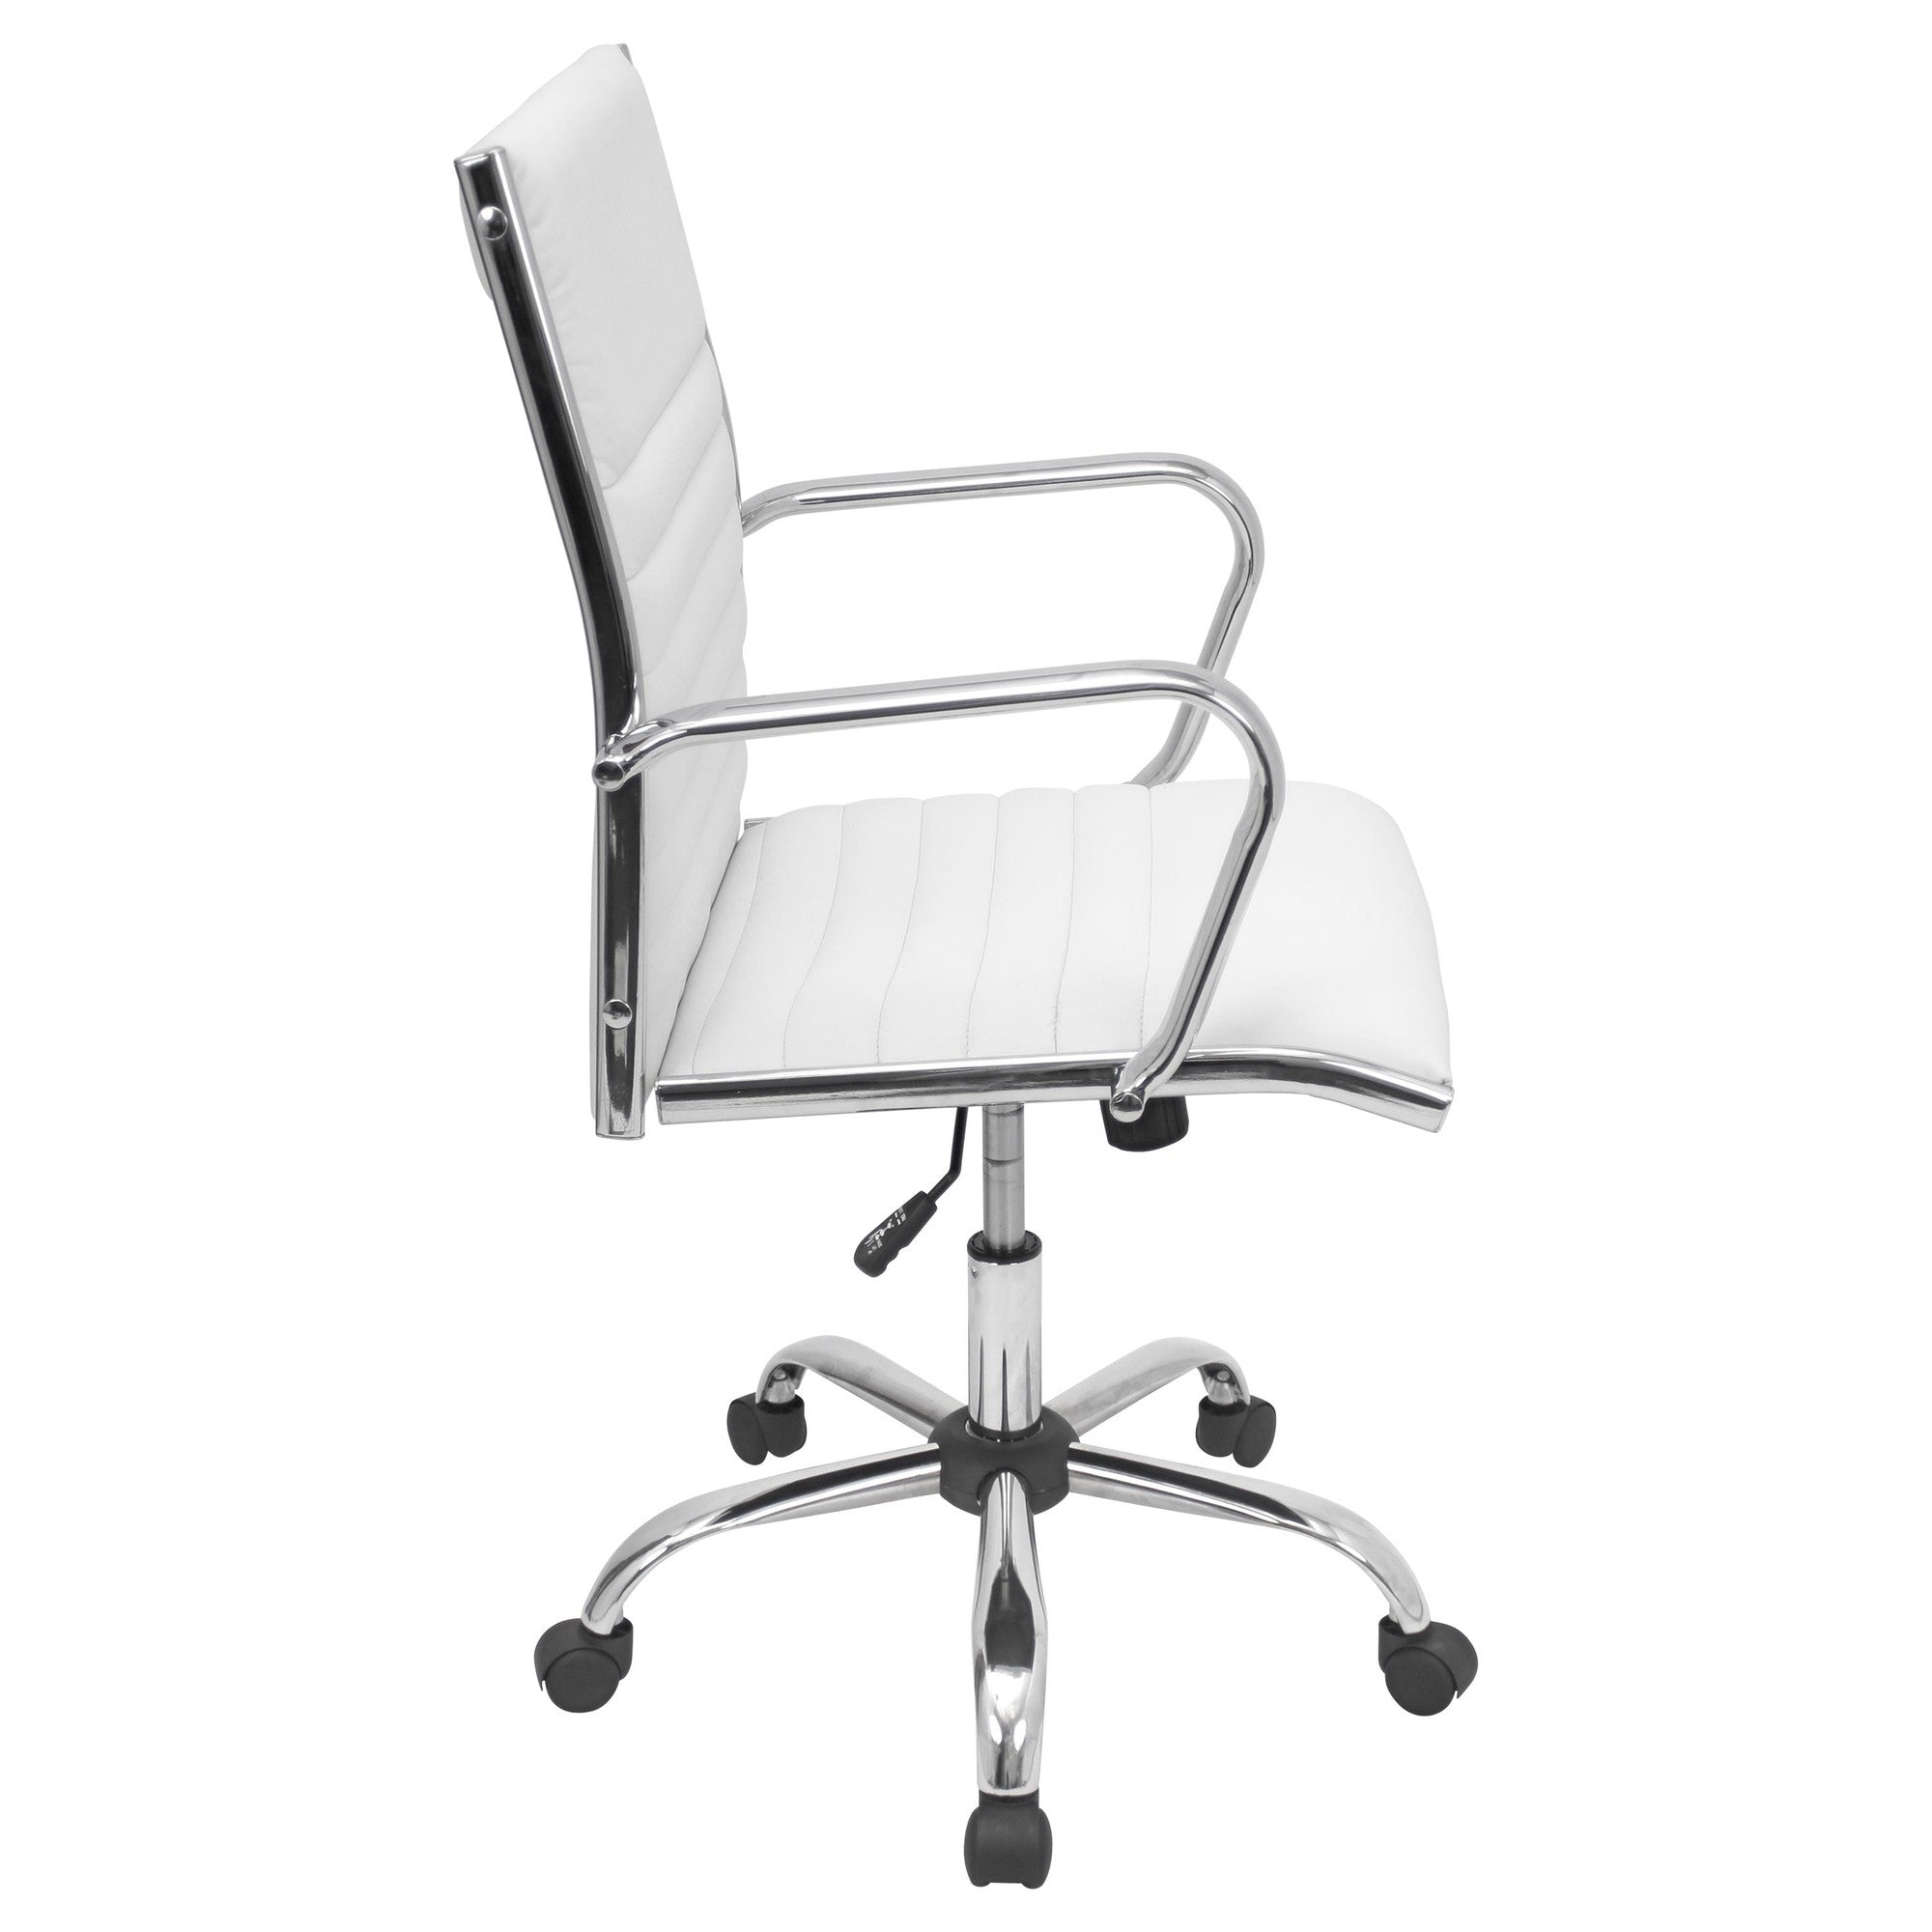 Master Office Chair